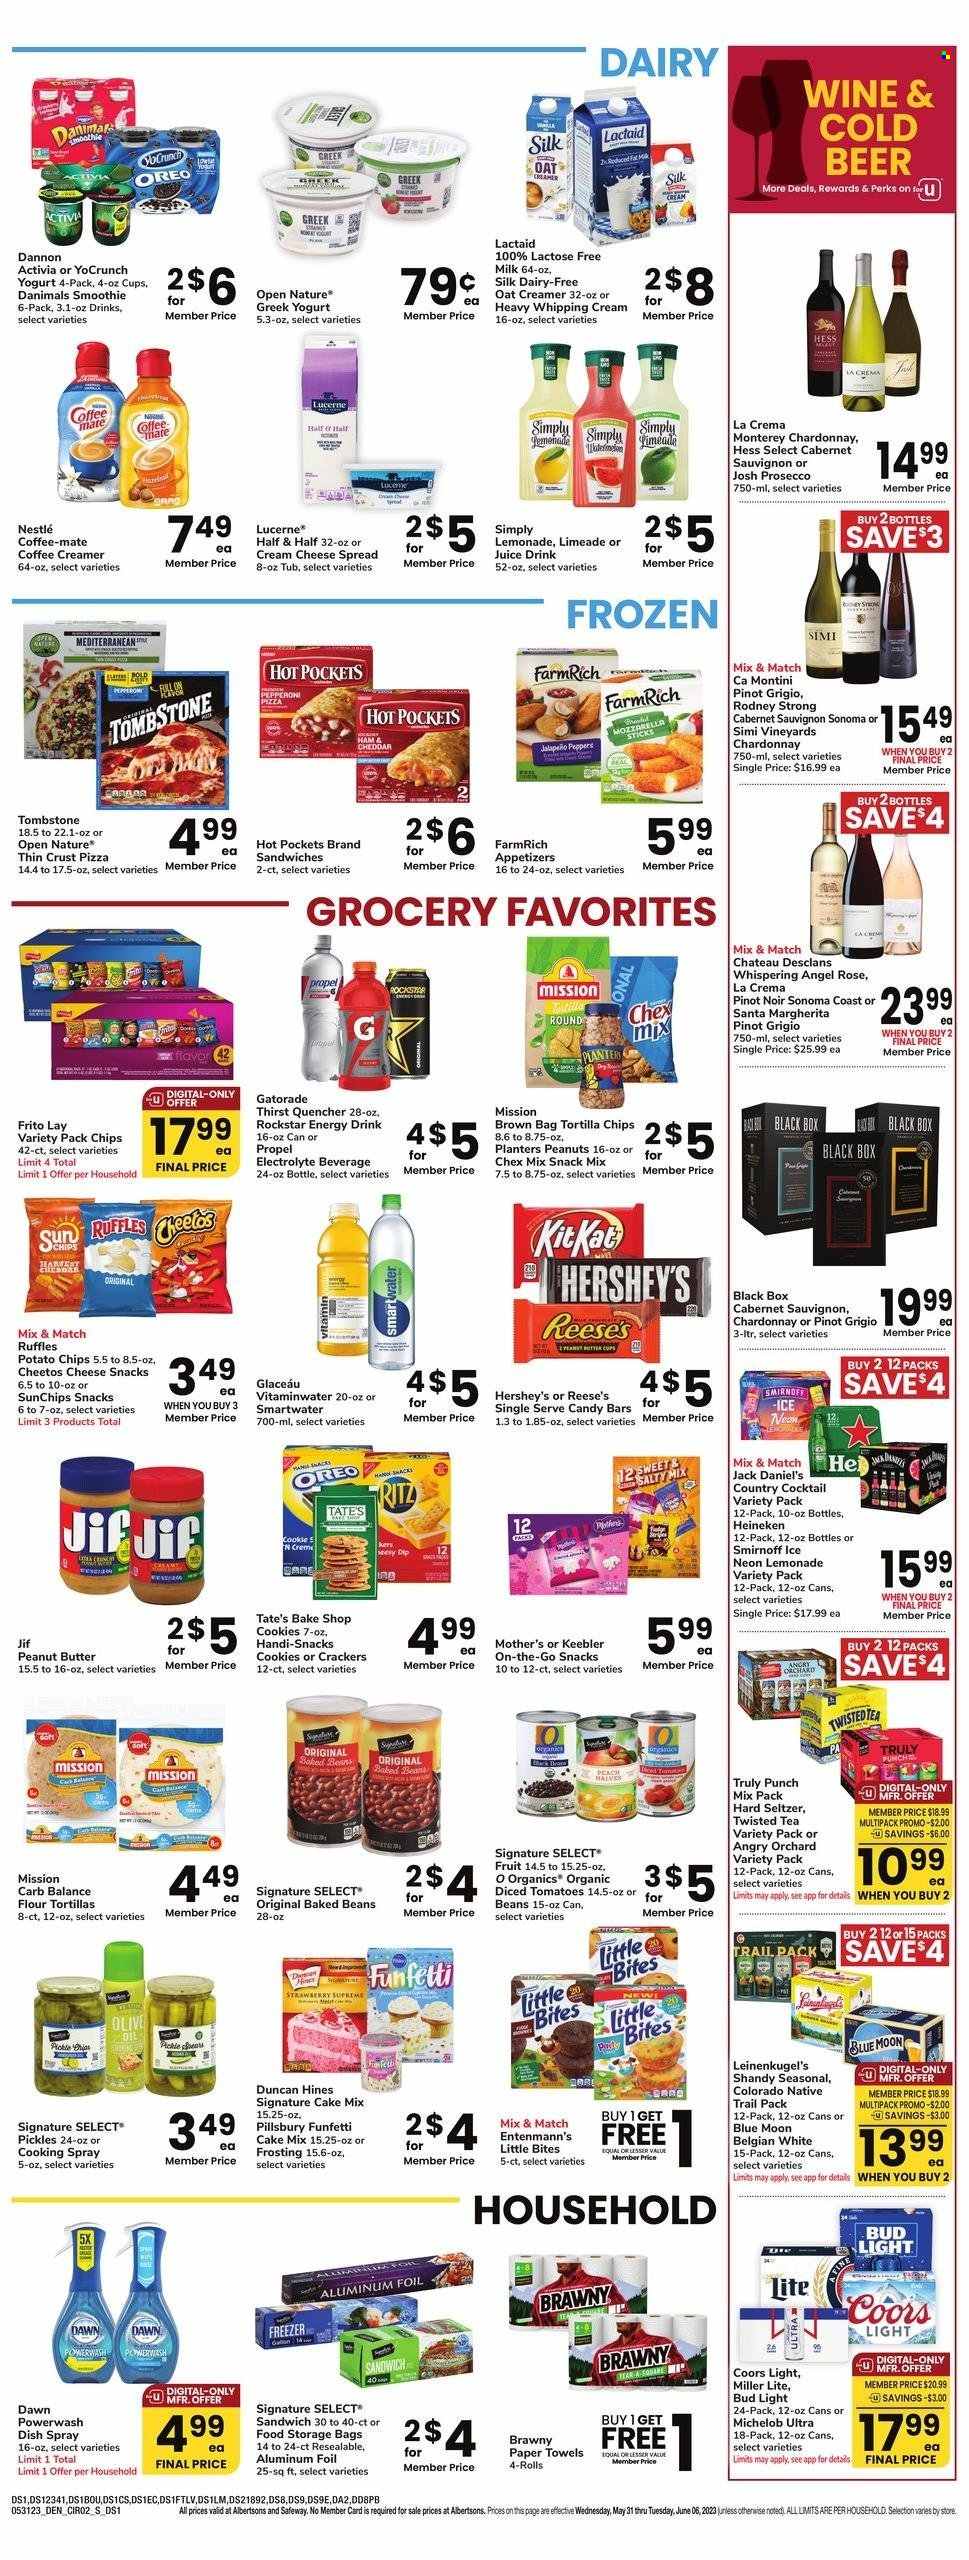 thumbnail - Safeway Flyer - 05/31/2023 - 06/06/2023 - Sales products - flour tortillas, Entenmann's, jalapeño, hot pocket, Jack Daniel's, pizza, sandwich, Pillsbury, ready meal, snack, Lactaid, greek yoghurt, Oreo, yoghurt, Activia, Dannon, Danimals, Coffee-Mate, milk, lactose free milk, Silk, creamer, whipping cream, dip, Reese's, Hershey's, cookies, Nestlé, KitKat, crackers, Santa, peanut butter cups, Little Bites, Keebler, RITZ, candy bar, tortilla chips, potato chips, Cheetos, Ruffles, Chex Mix, salty snack, frosting, pickles, baked beans, diced tomatoes, cooking spray, Jif, peanuts, Planters, lemonade, juice, energy drink, ice tea, Rockstar, Gatorade, smoothie, Smartwater, water, Cabernet Sauvignon, red wine, sparkling wine, white wine, prosecco, Chardonnay, wine, Pinot Noir, alcohol, Pinot Grigio, Smirnoff, punch, Hard Seltzer, TRULY, beer, Bud Light, Heineken, kitchen towels, paper towels, storage bag, aluminium foil, electrolyte drink, Leinenkugel's, Miller Lite, Half and half, Coors, Blue Moon, Twisted Tea, Michelob. Page 2.